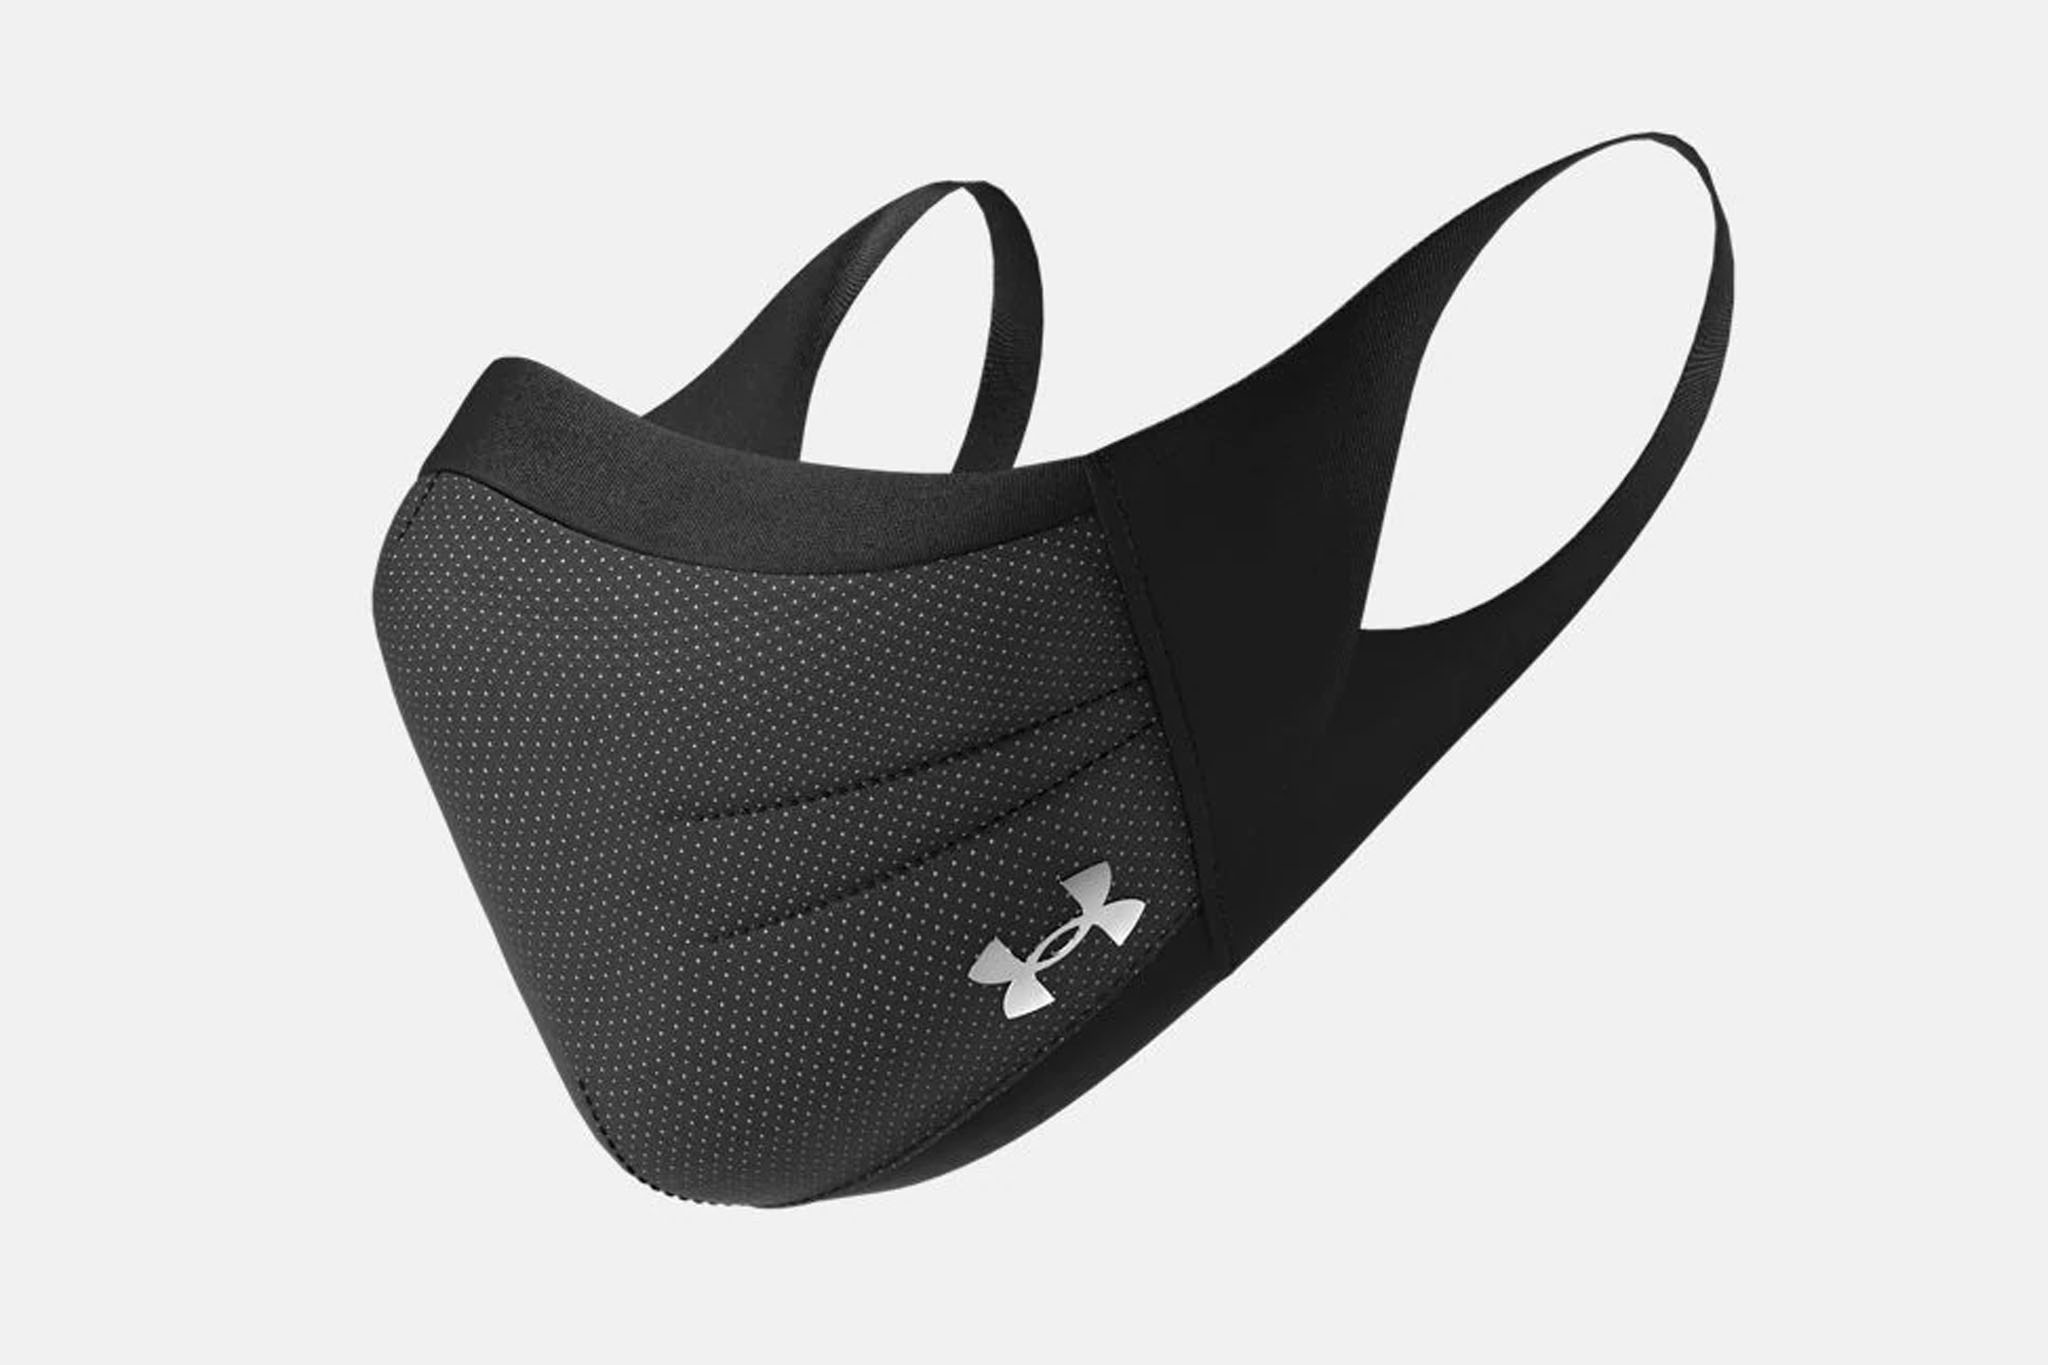 This Under Armour mask sold out 